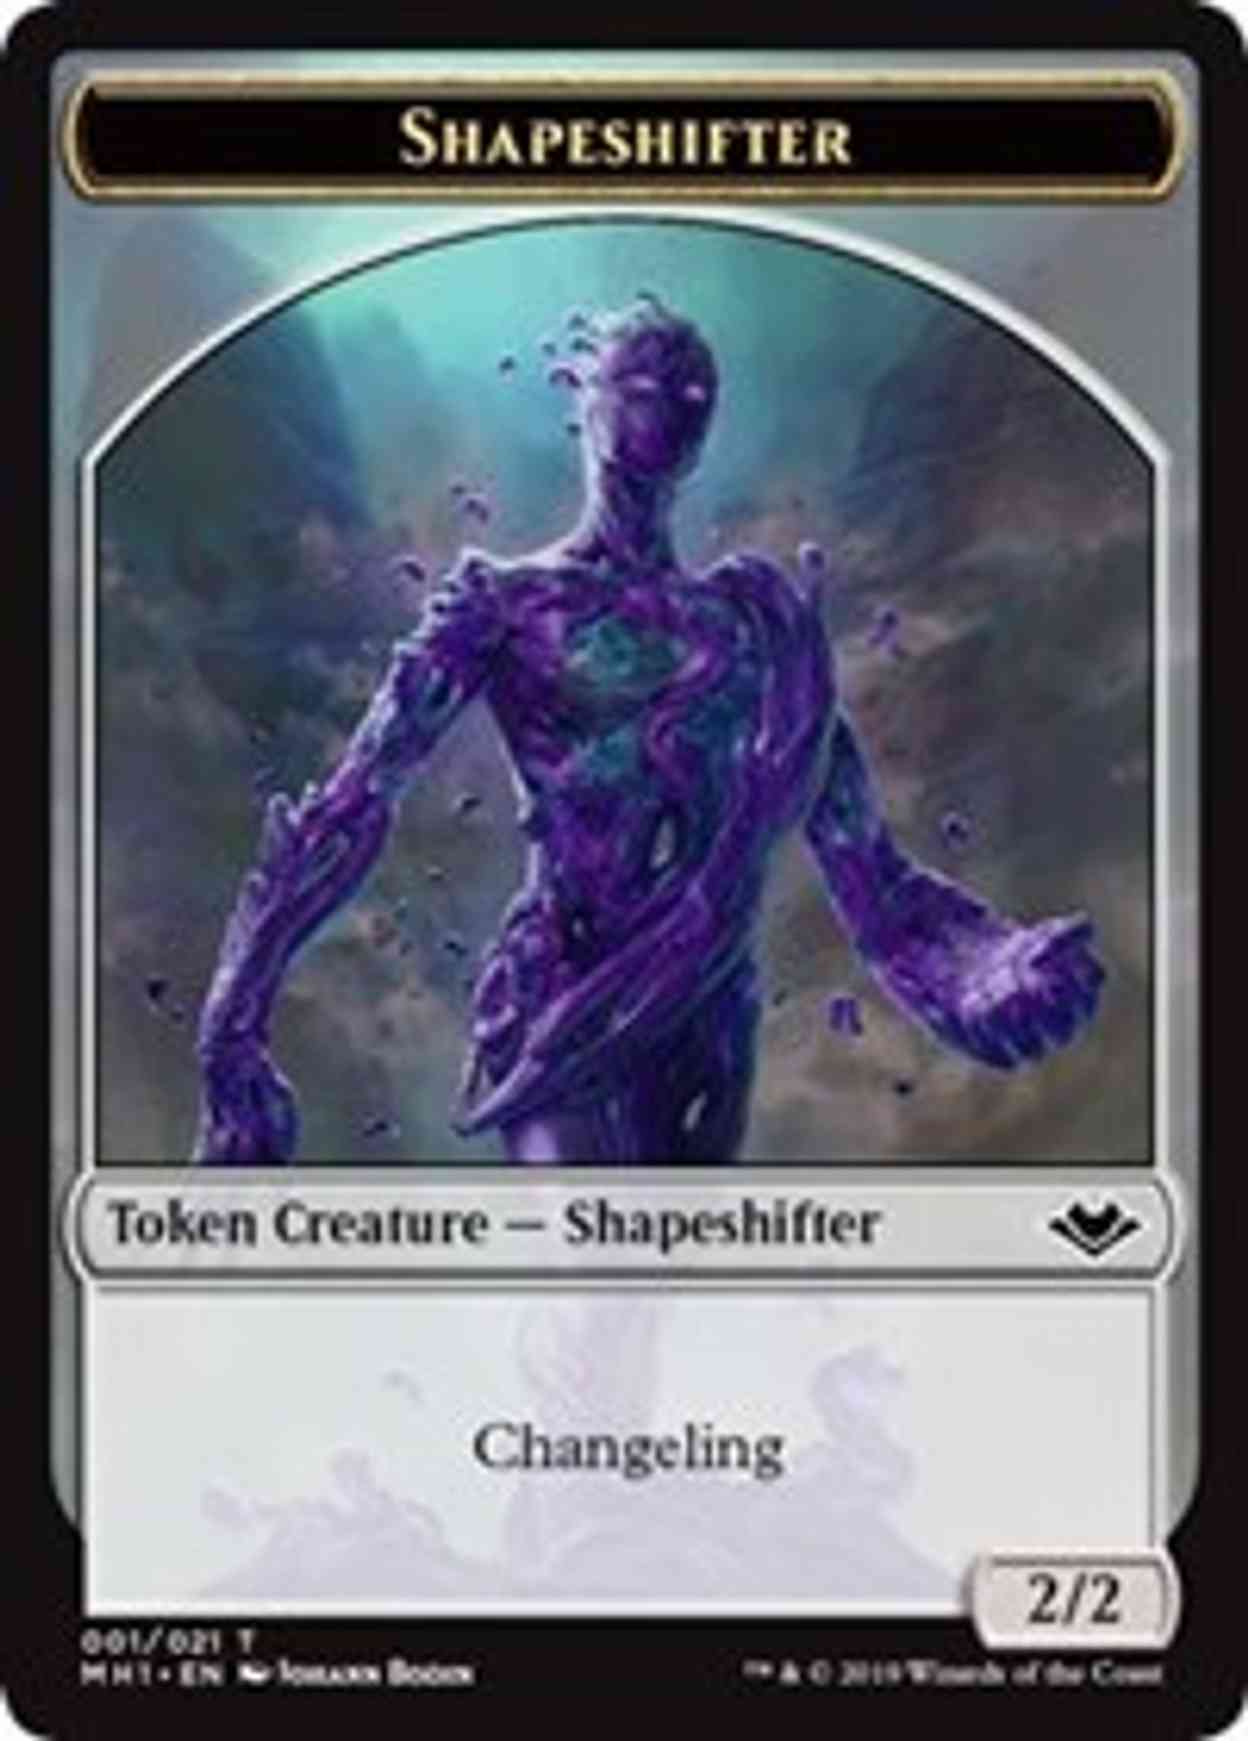 Shapeshifter (001) // Emblem - Wrenn and Six (021) Double-sided Token magic card front